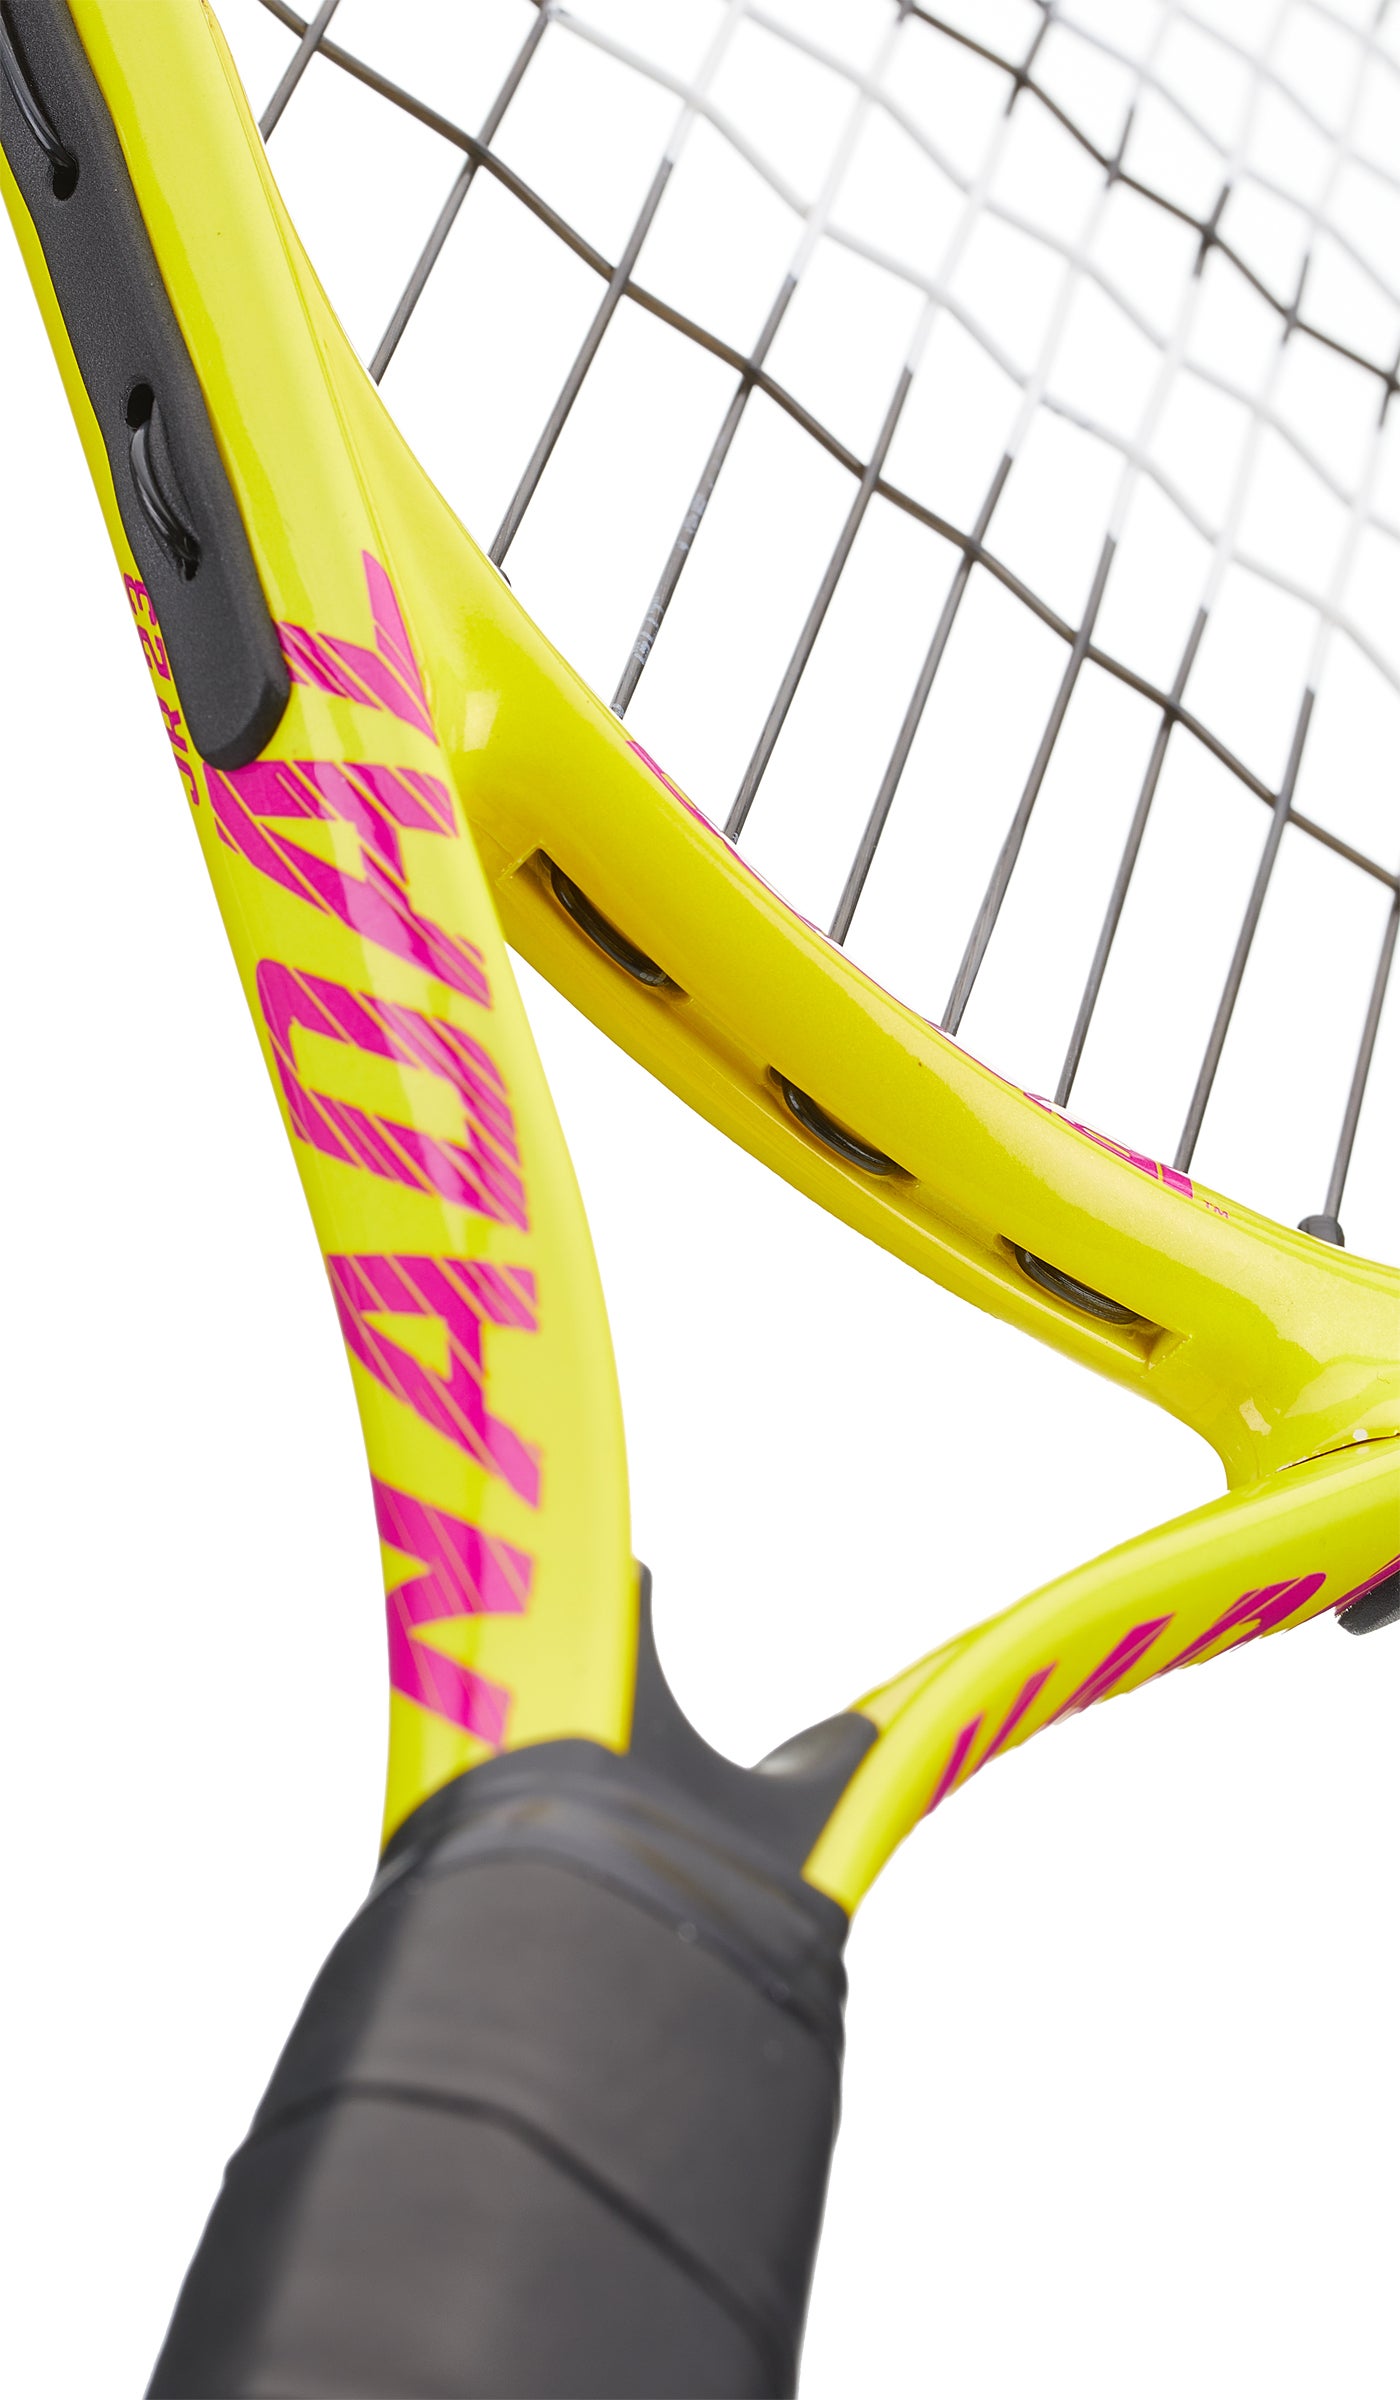 BABOLAT NADAL 23 INCH JUNIOR ALUMINIUM TENNIS RACKET IDEAL FOR AGES 6-8 YEARS 